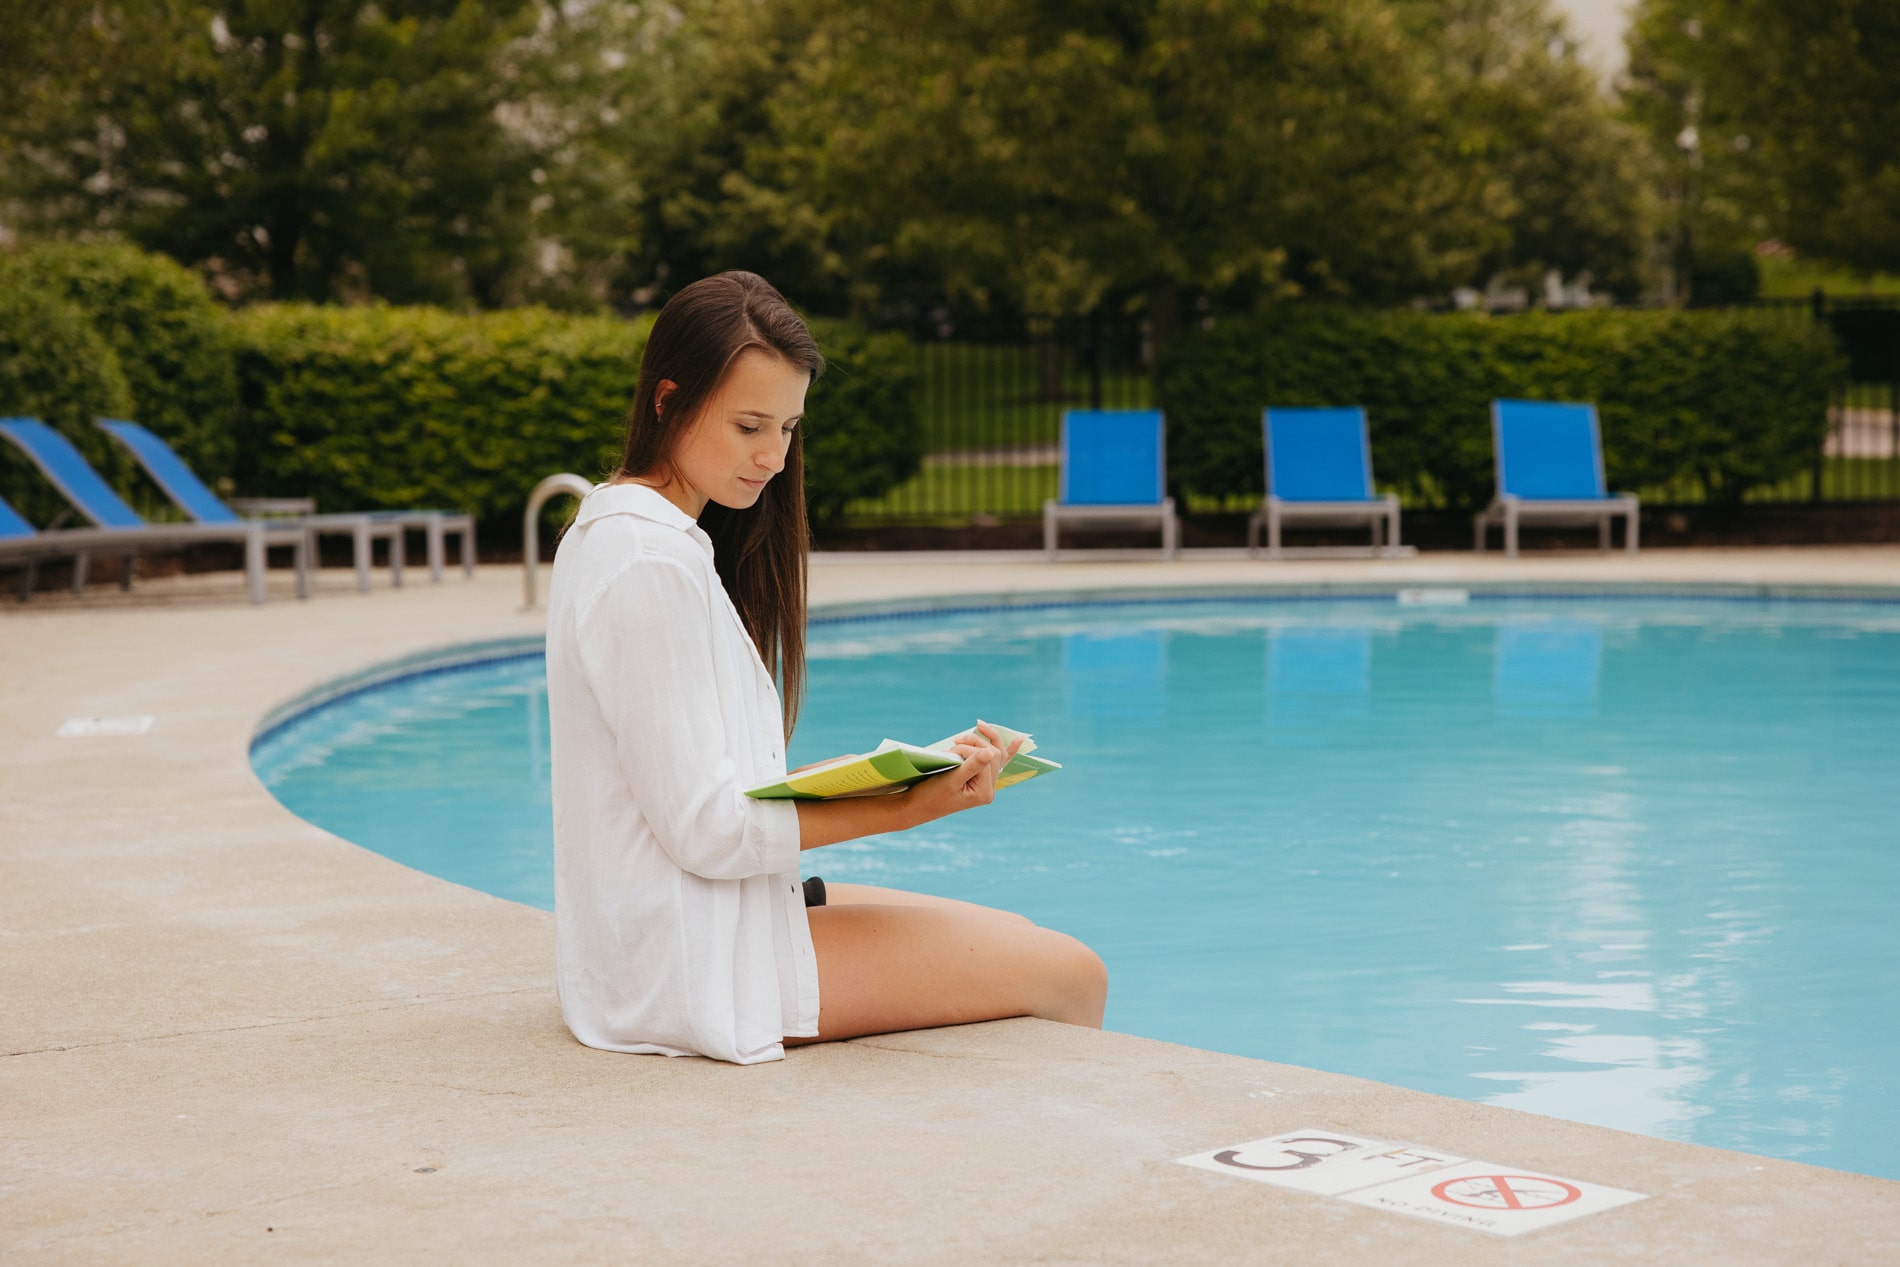 Union Place woman sits by pool reading